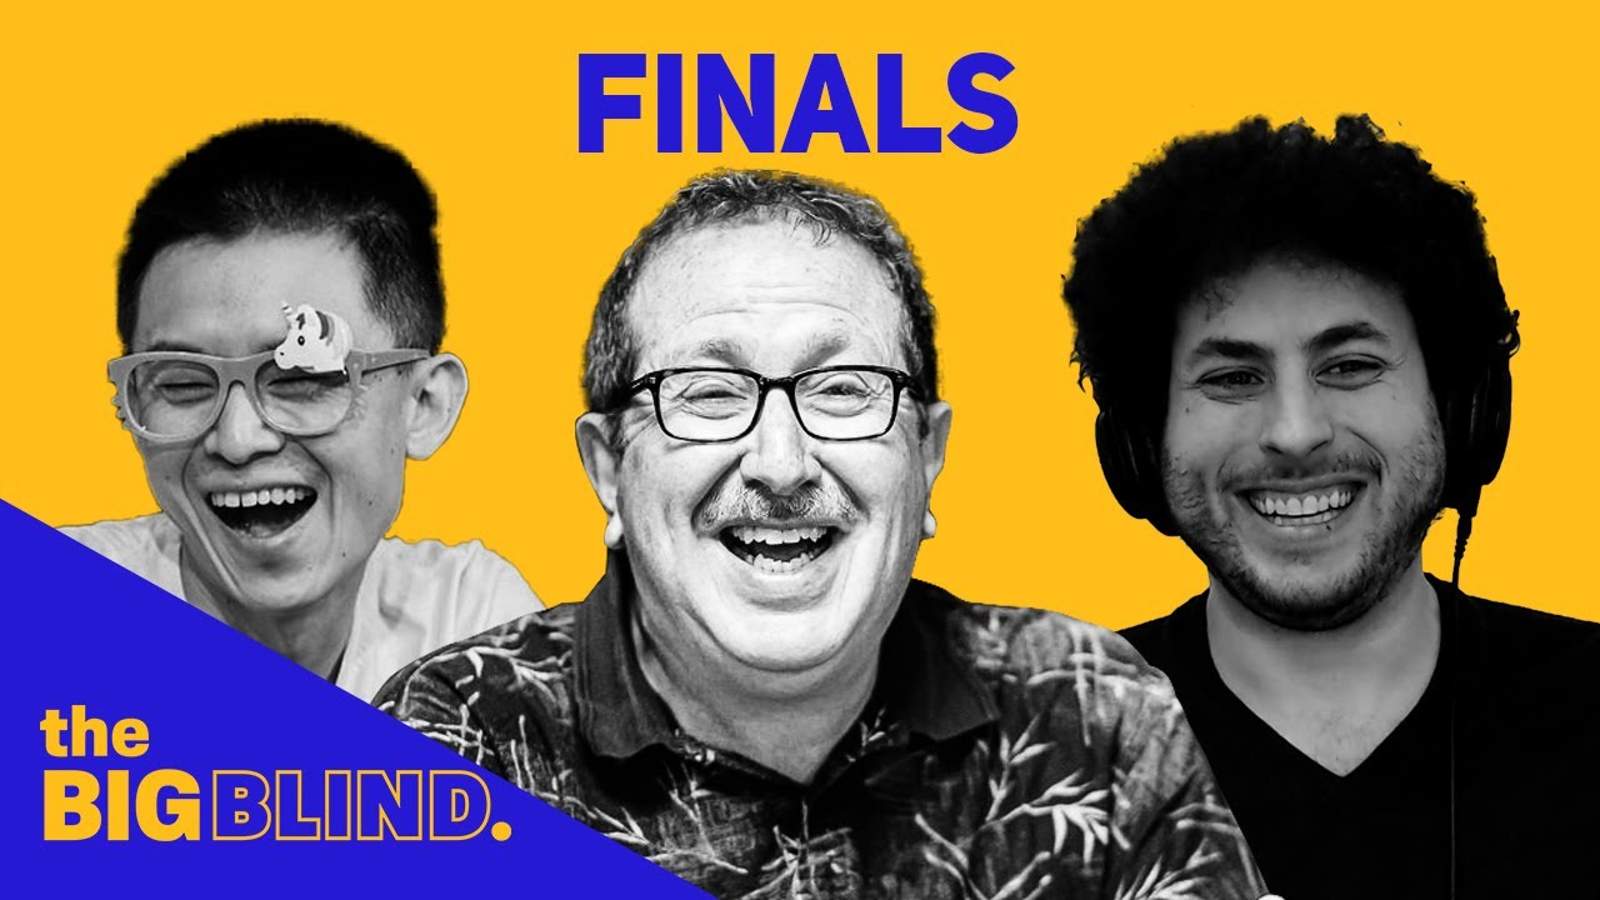 Rewatch The Big Blind Finals on YouTube and Facebook